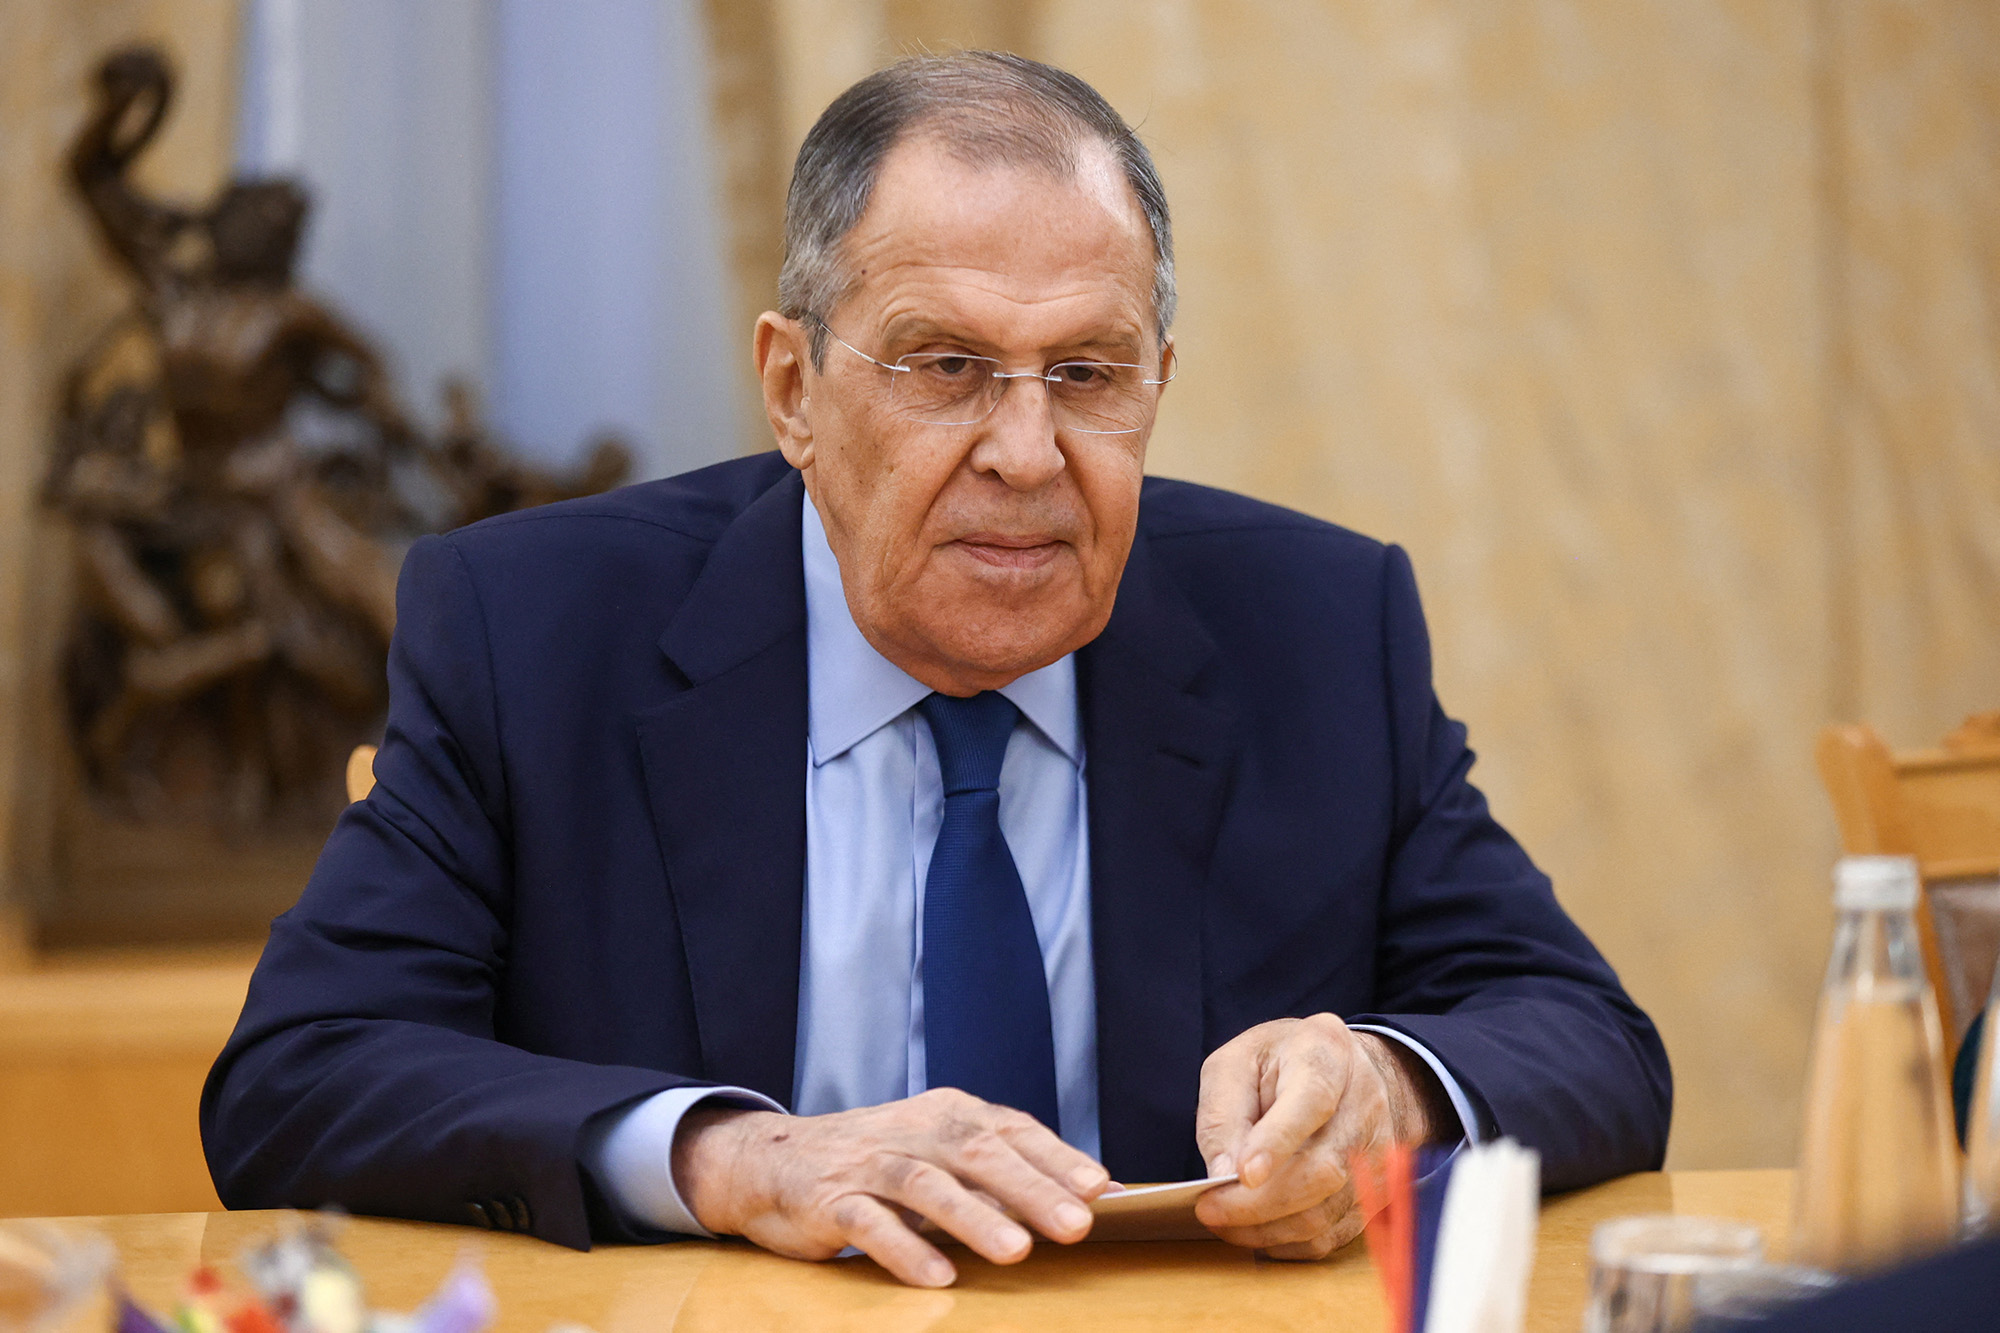 Russia's Foreign Minister Sergei Lavrov attends a meeting in Moscow, Russia, on December 1.